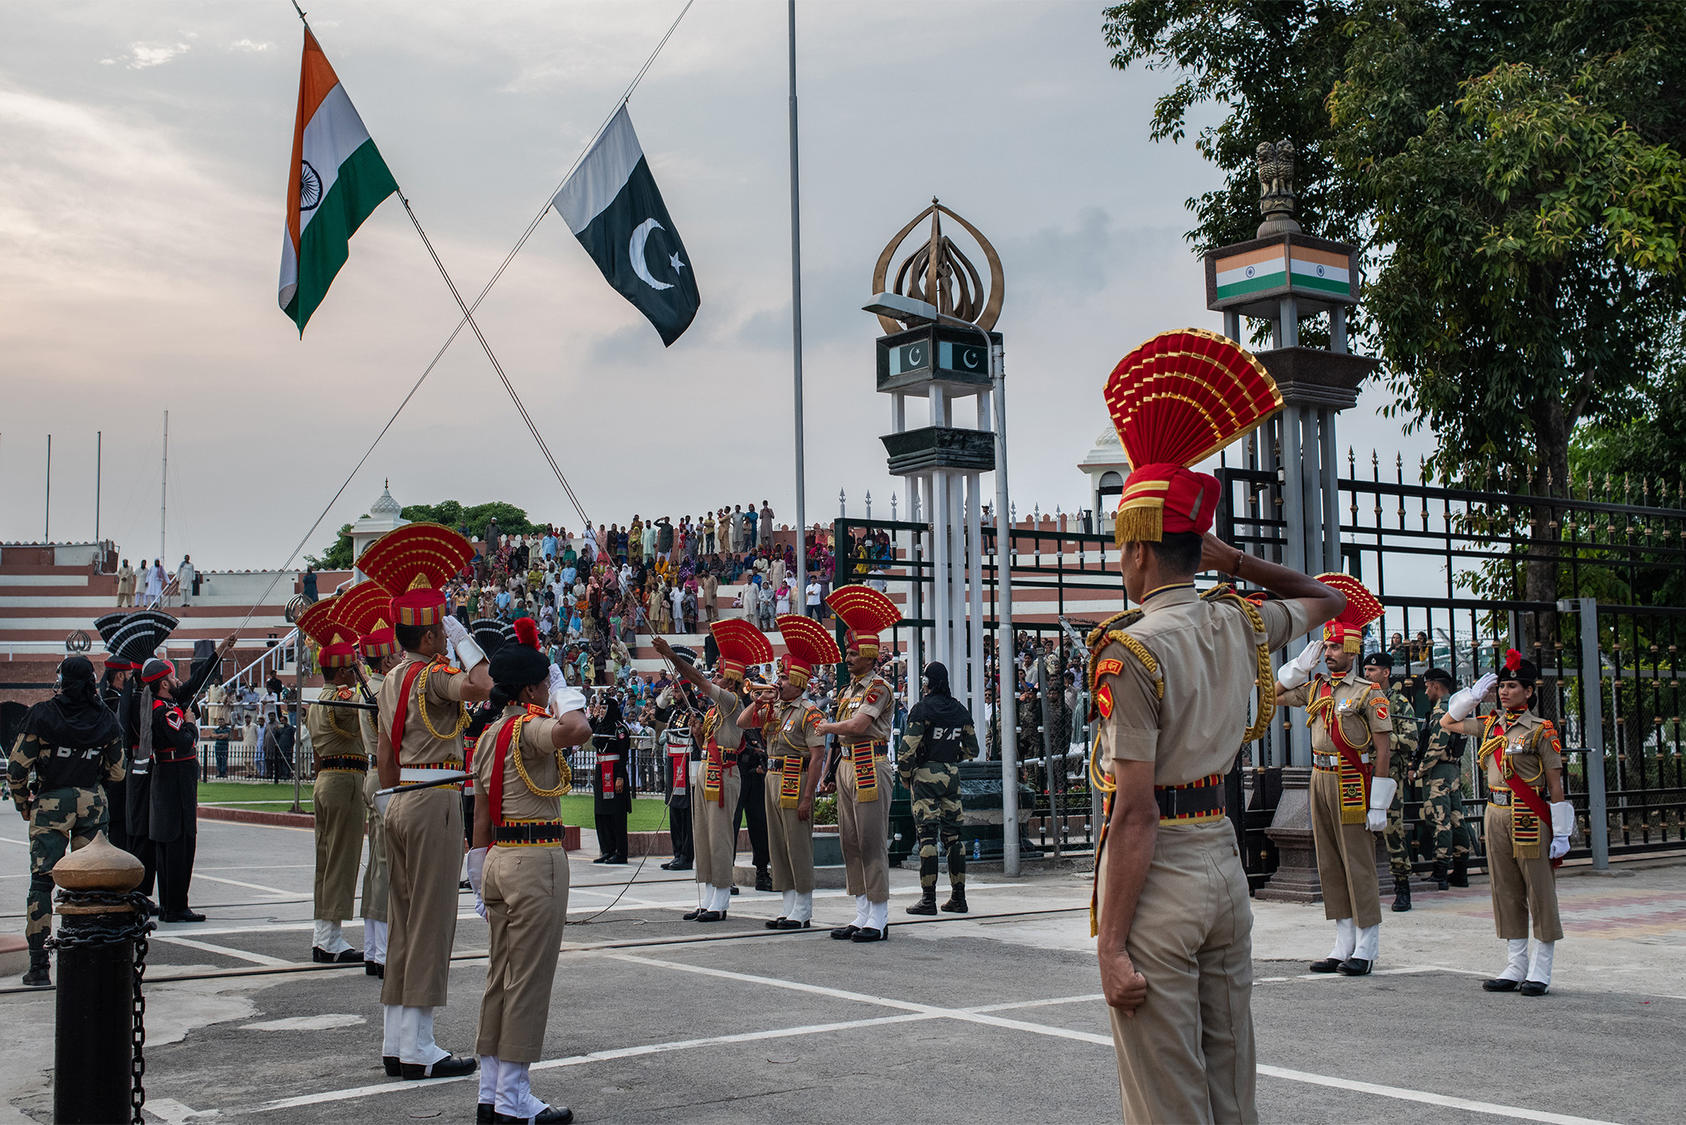 Members of India's Border Security Force, foreground, at the daily flag-lowering ceremony with their Pakistani counterparts, in black uniforms, at the Wagah-Attari border crossing, Sept. 19, 2019. (Rebecca Conway/The New York Times)